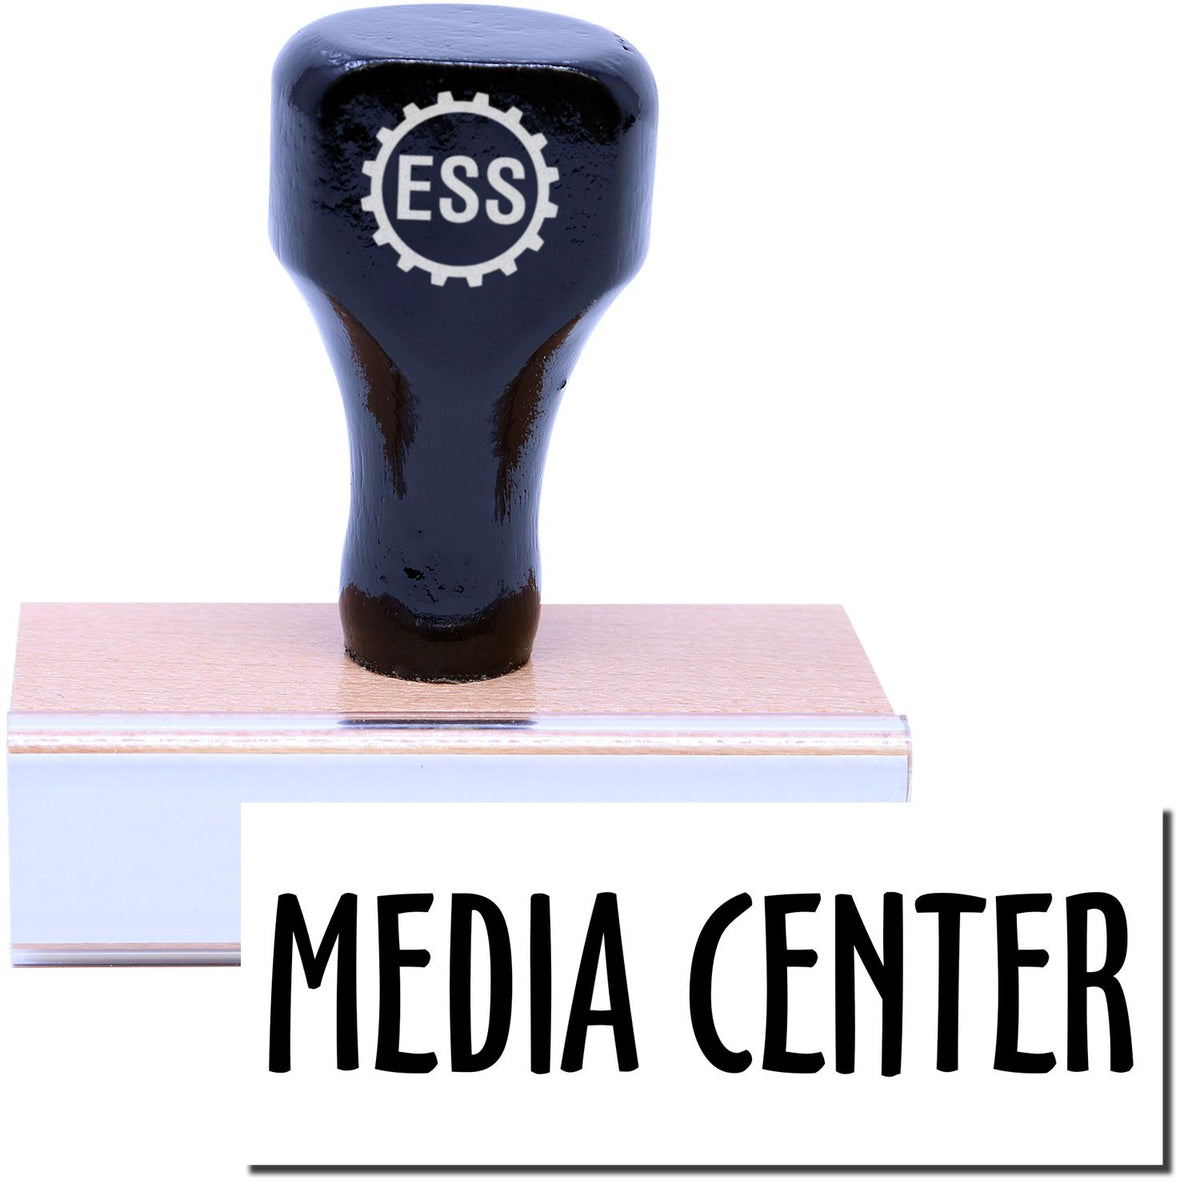 A stock office rubber stamp with a stamped image showing how the text &quot;MEDIA CENTER&quot; in a large font is displayed after stamping.